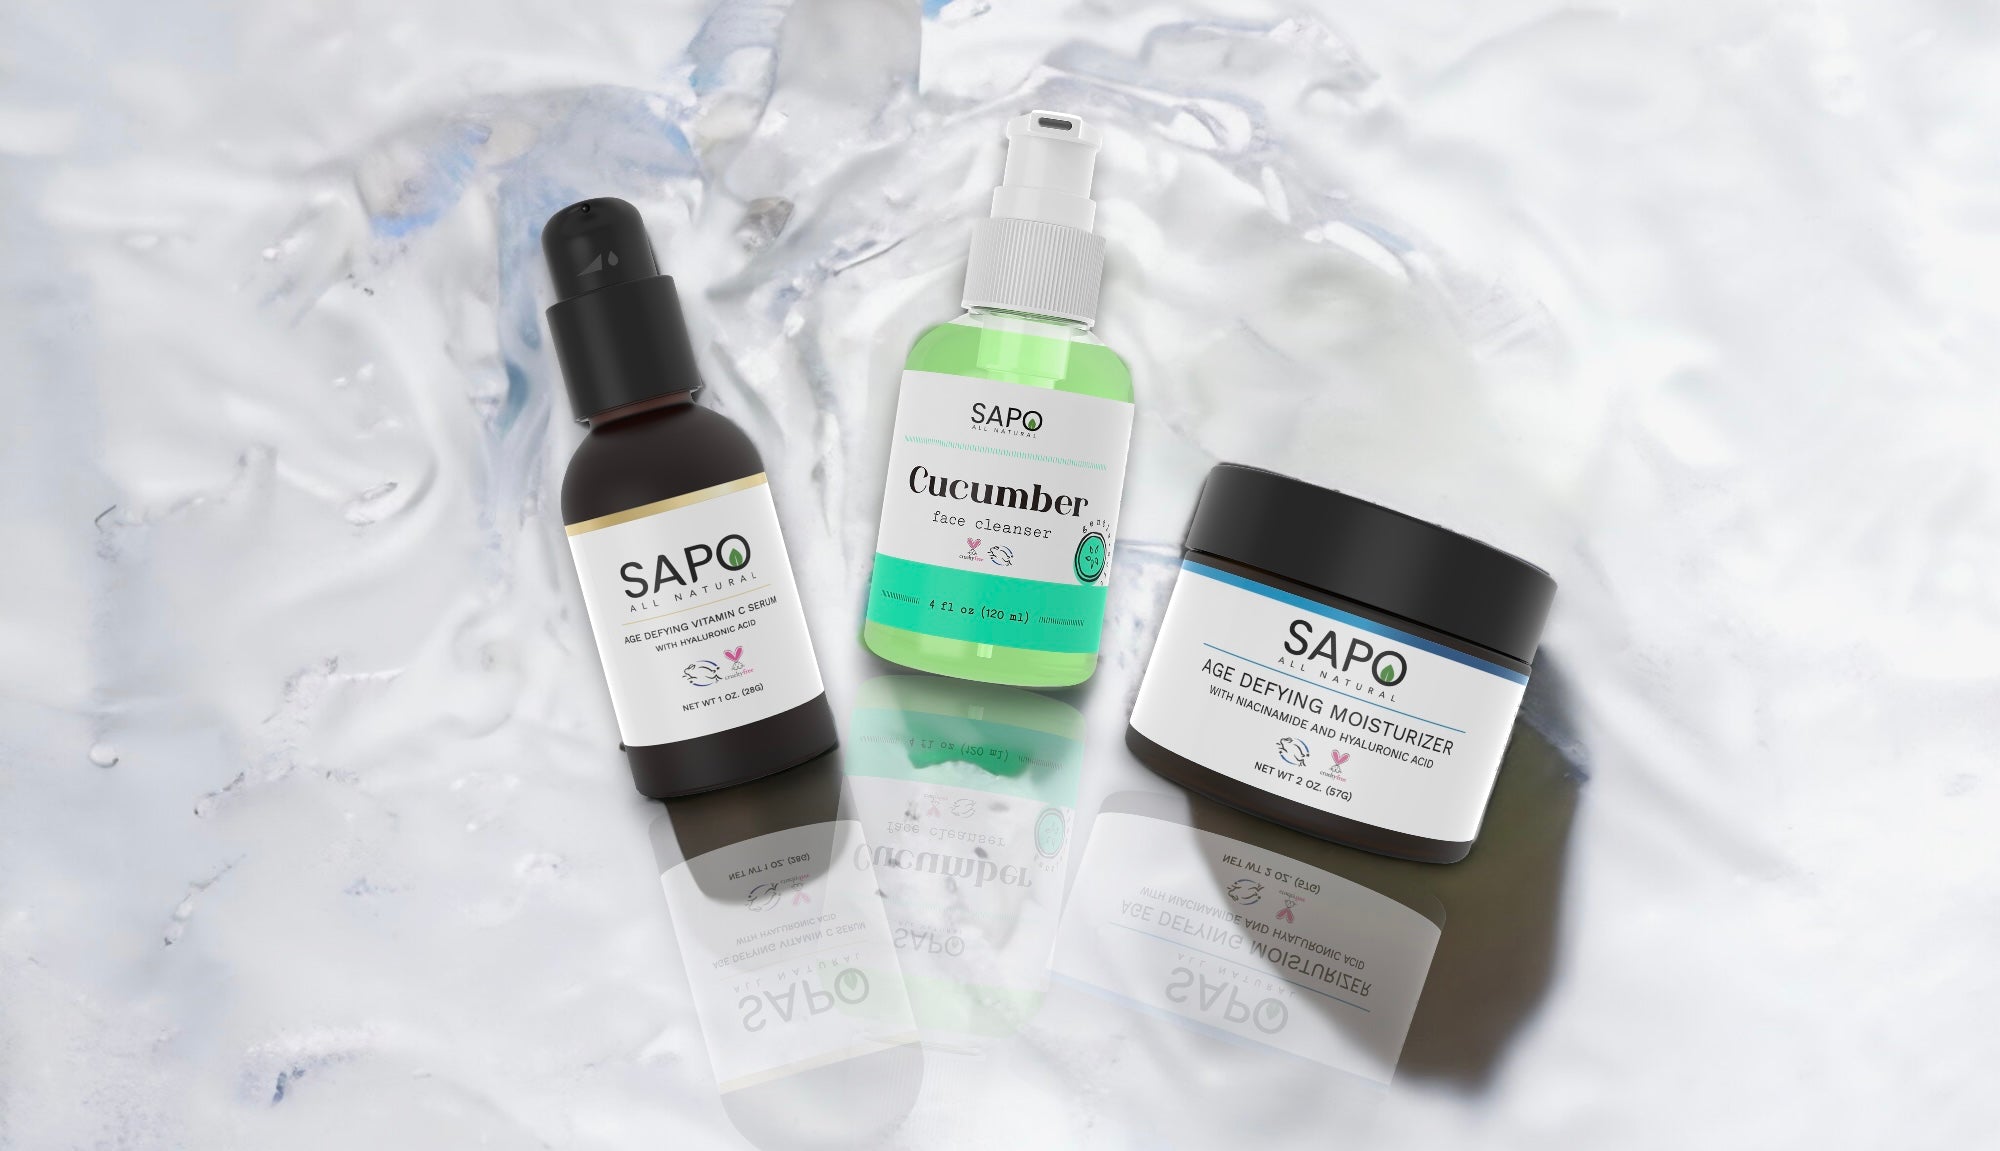 Sapo all natural moisturizer, cucumber face cleanser and vitamin C serum combination